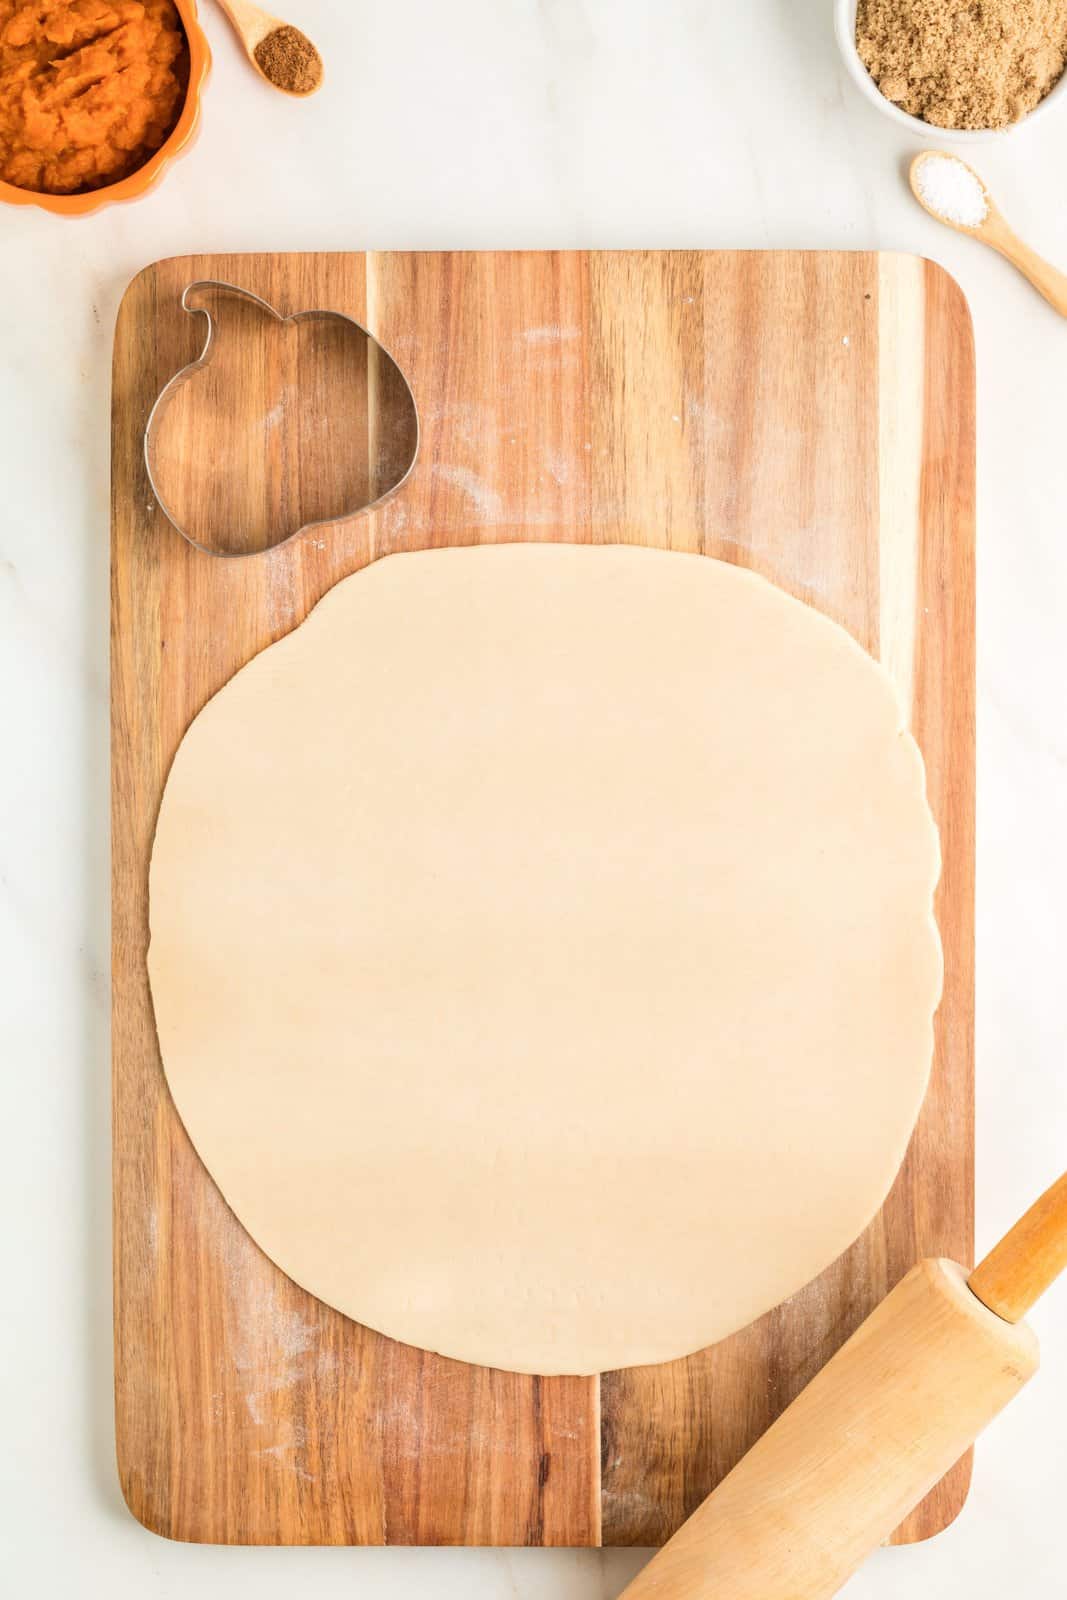 One pie crust rolled out on cutting board.